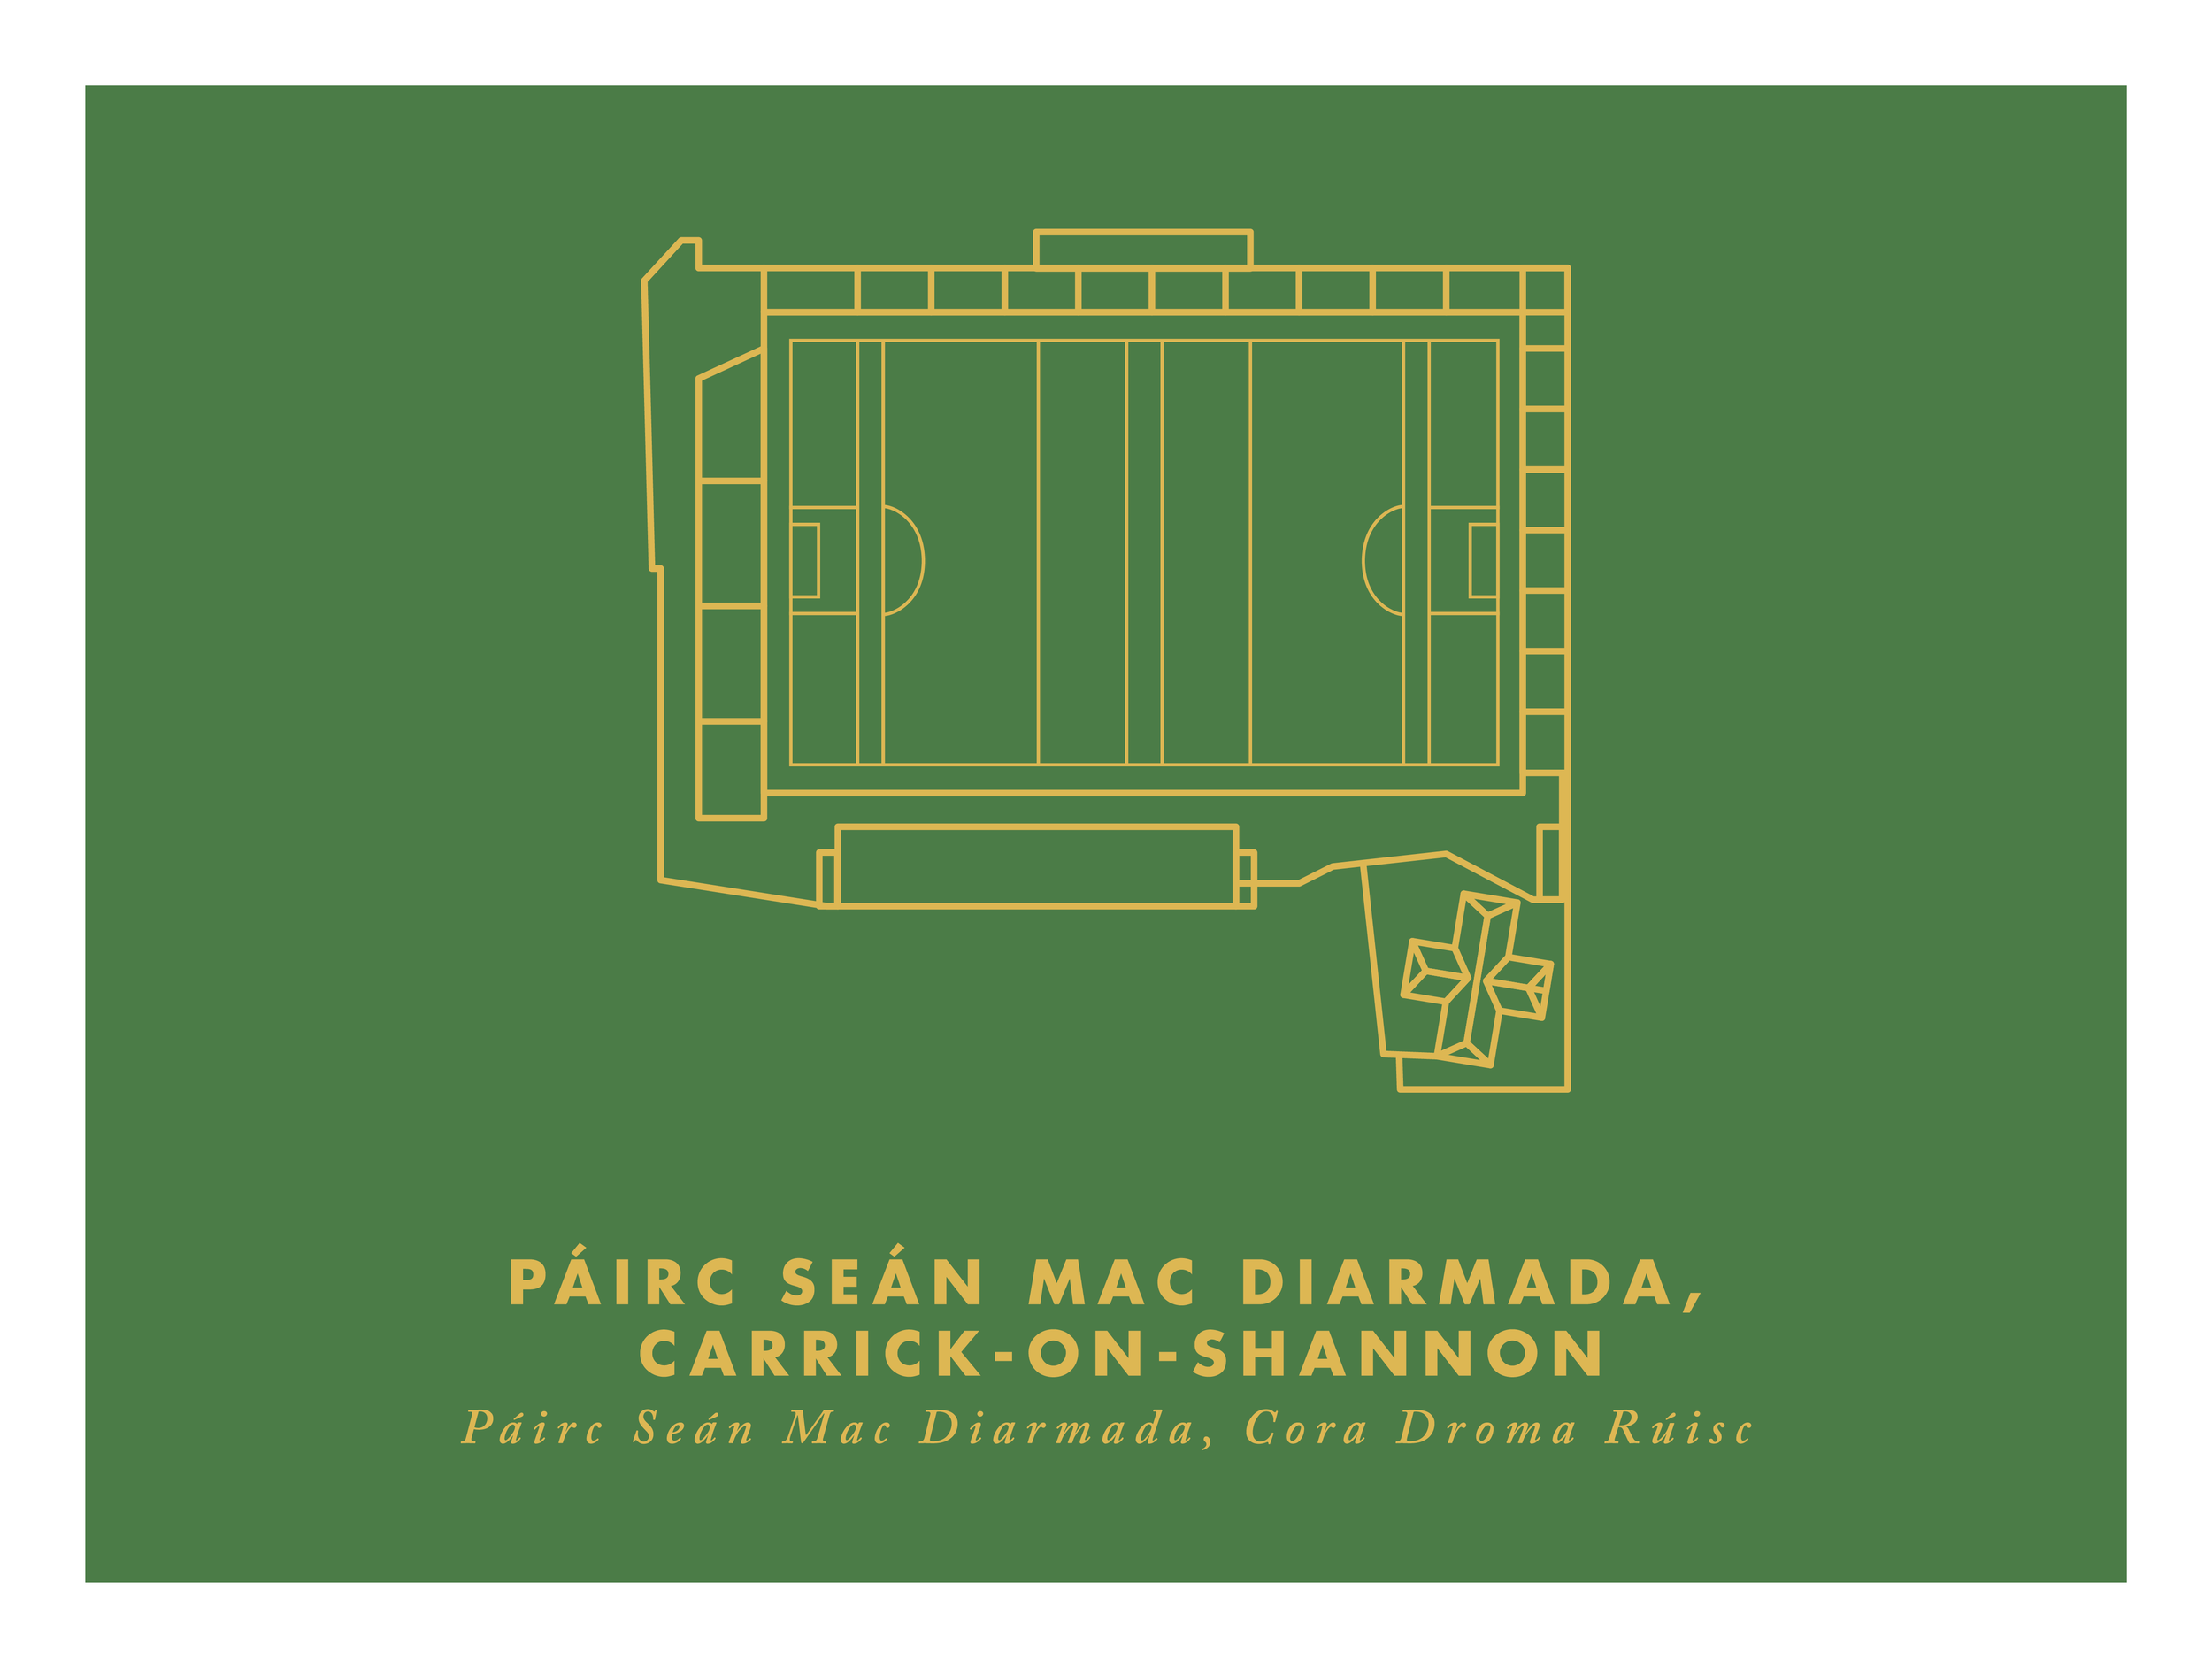 GAA Stadiums of Ireland Individual Colours 16x12 v01-28.png